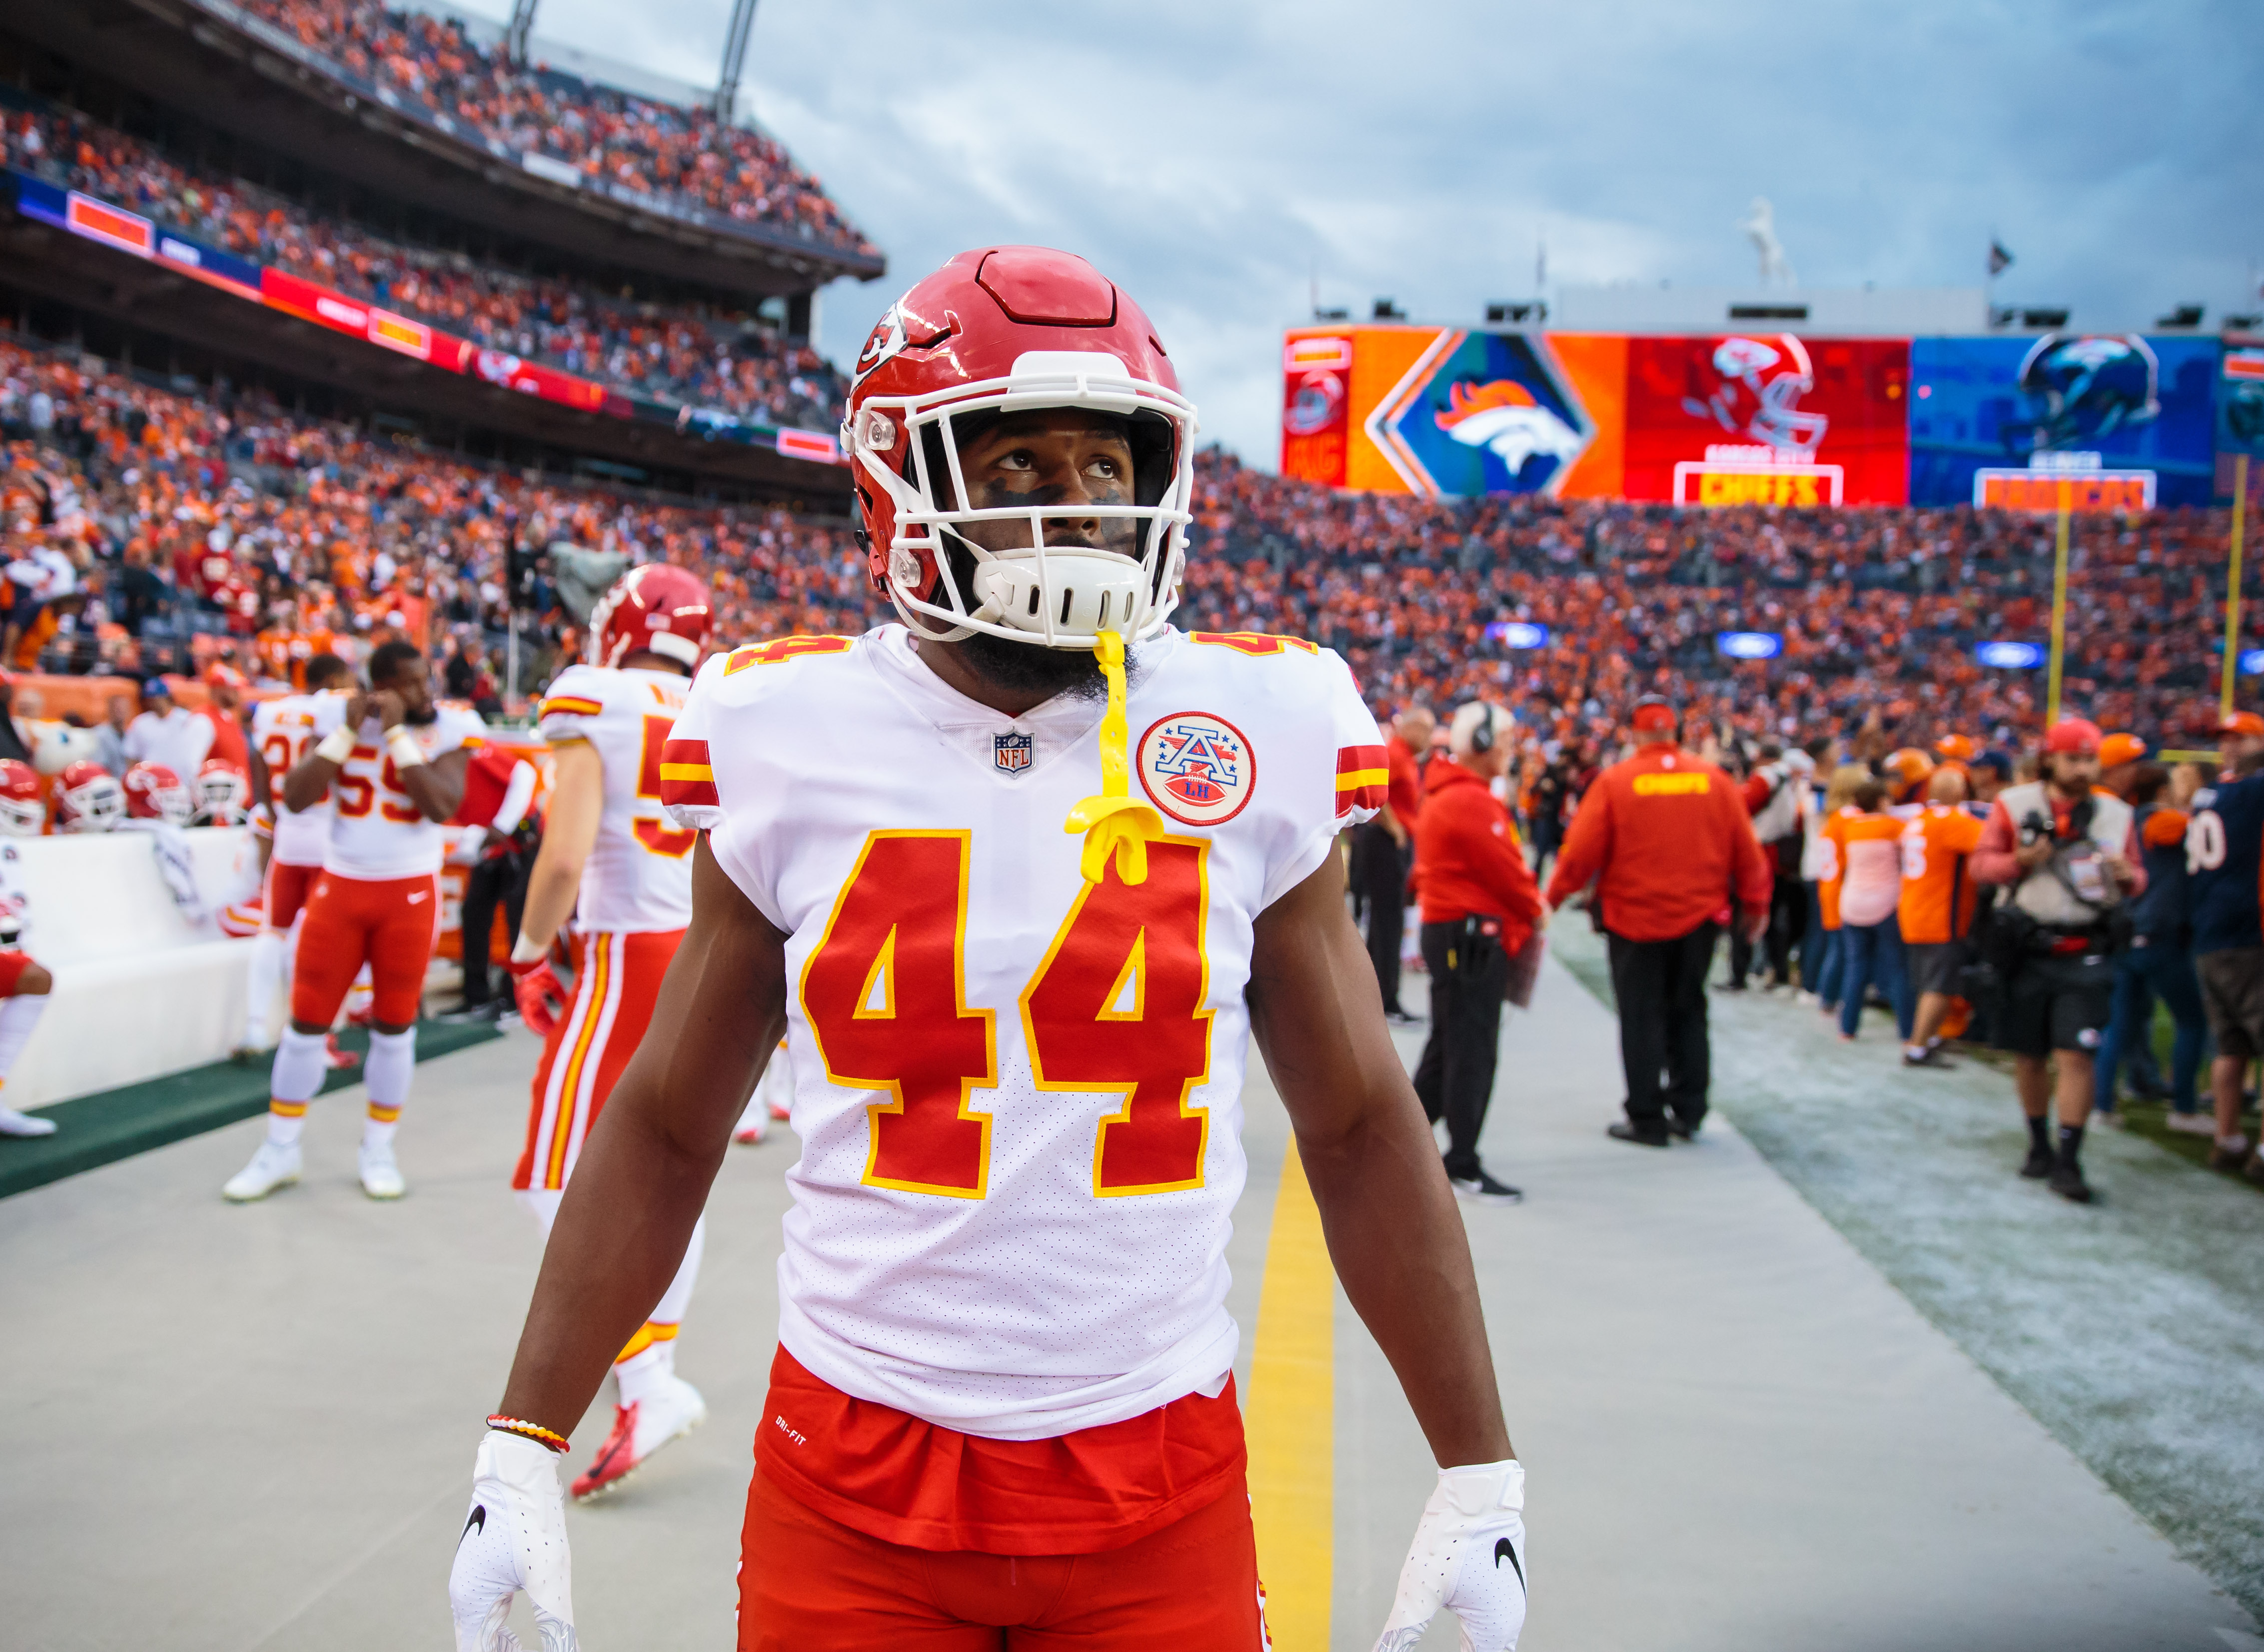 Kansas City Chiefs 53man roster projections ahead of training camp